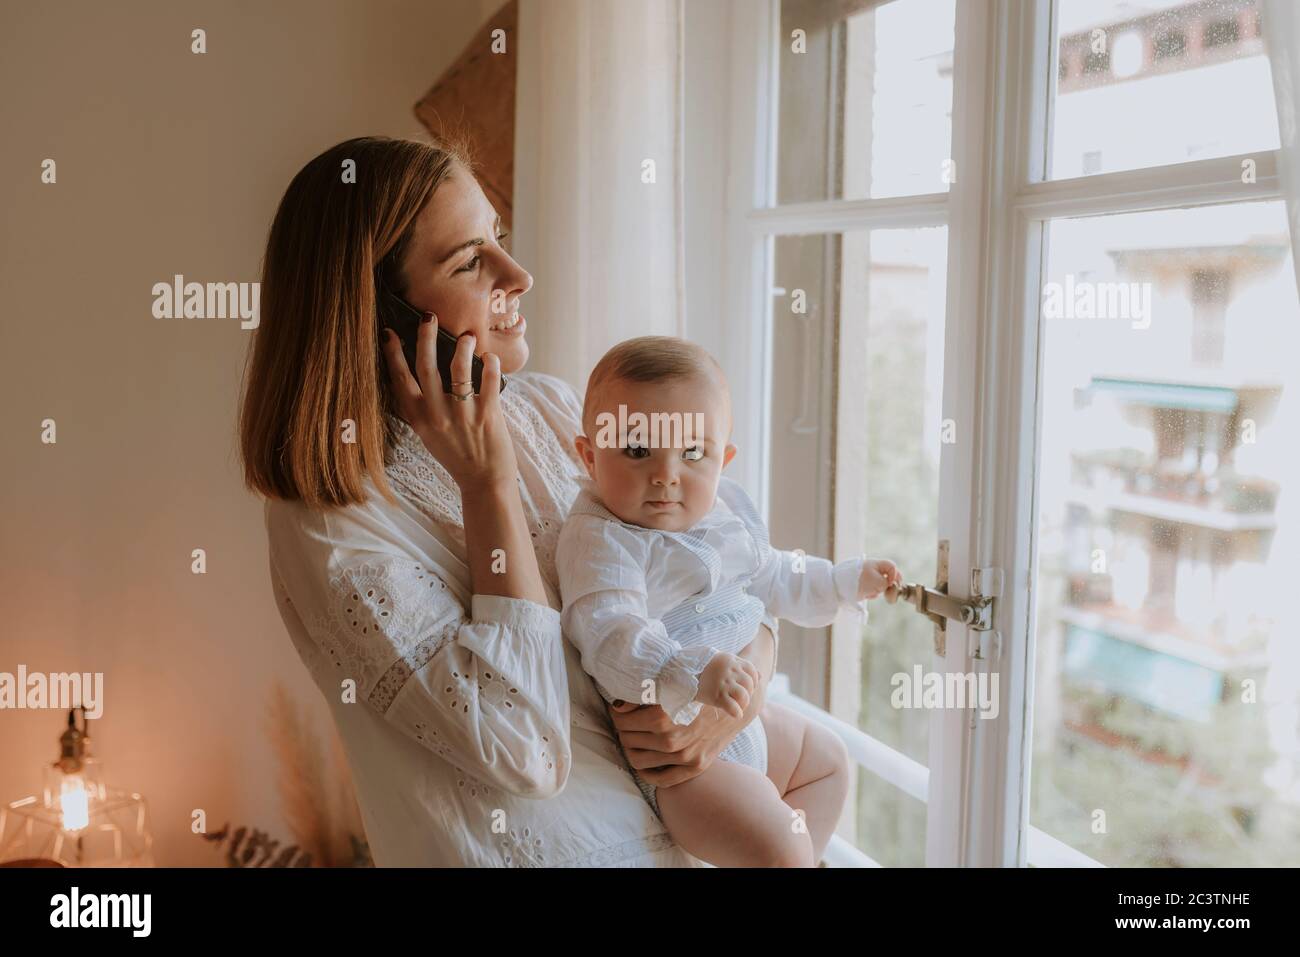 Young mother talks on the phone looking out the window with her baby in arms Stock Photo